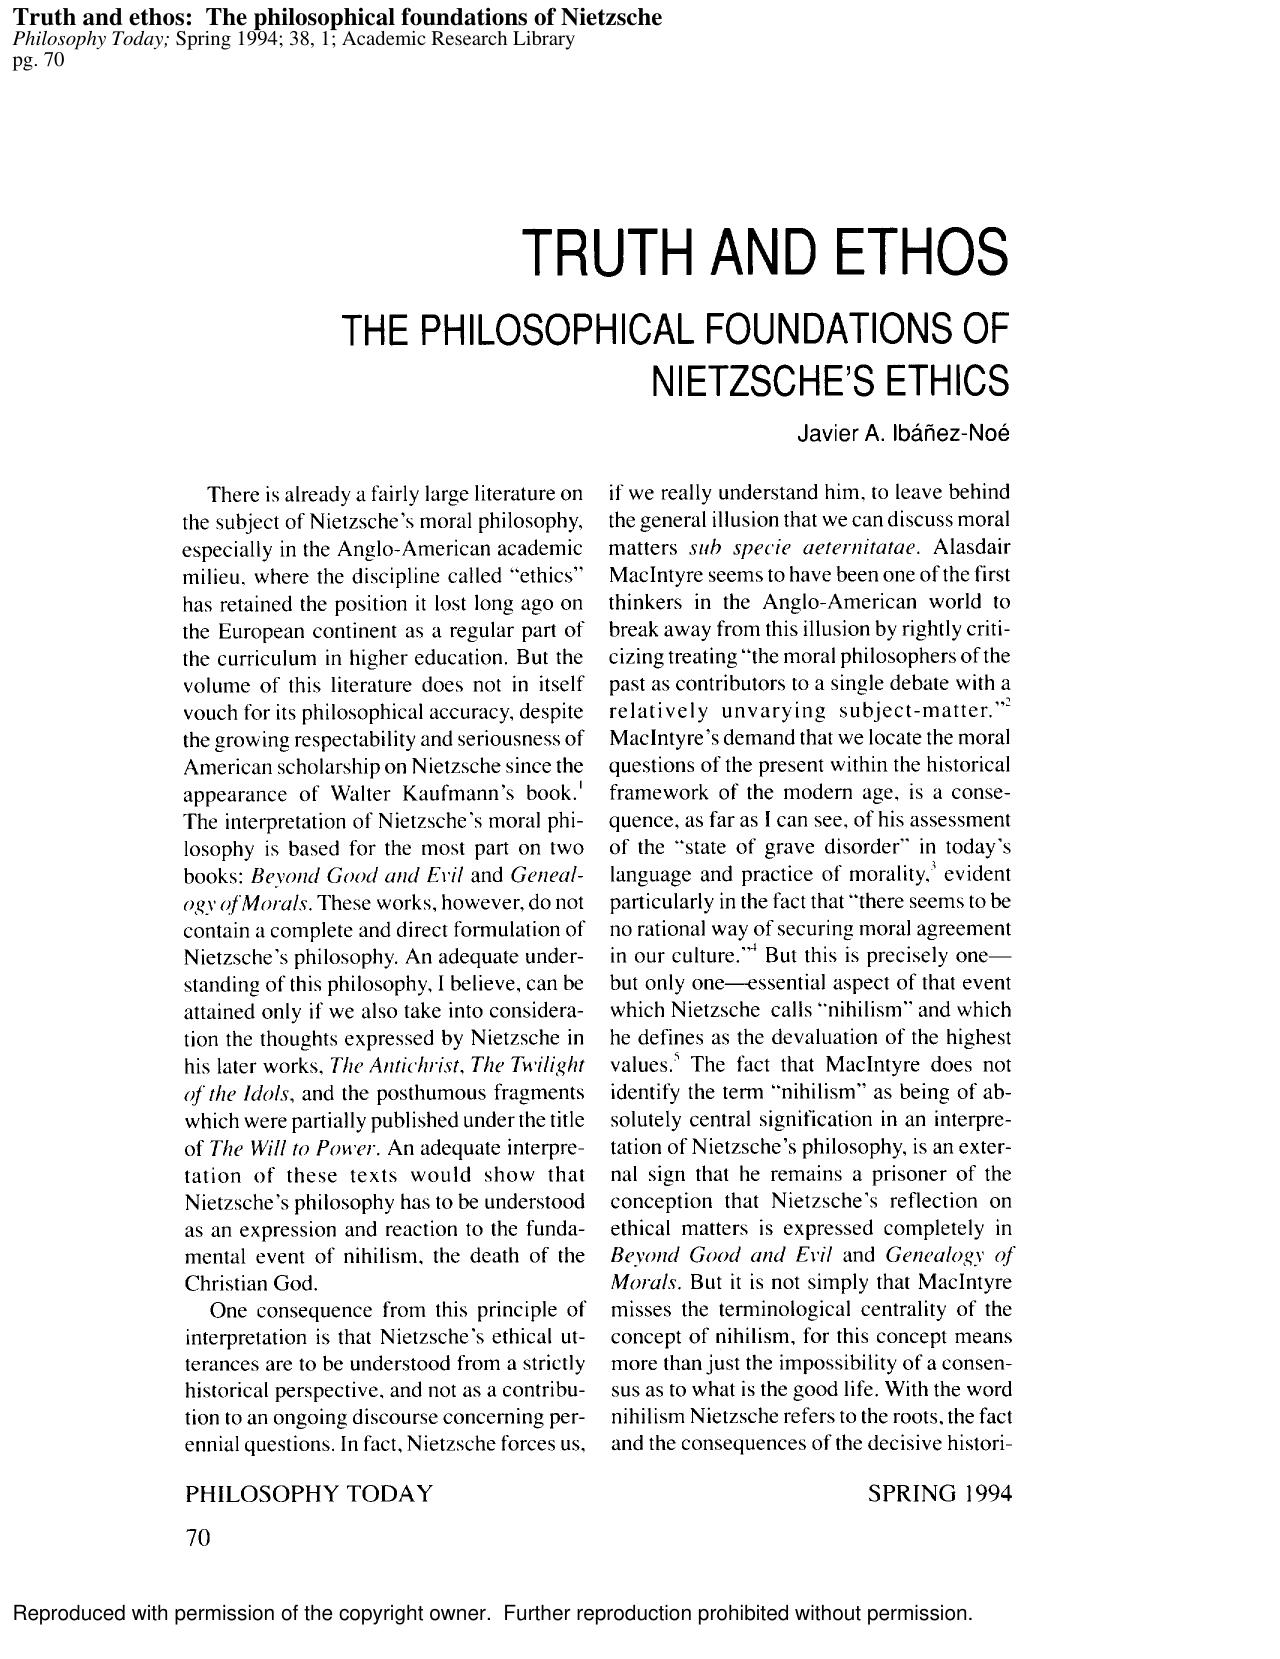 Philosophy Today - Truth and Ethos - The Philosophical Foundations Of Nietzsche's Ethics - Essay